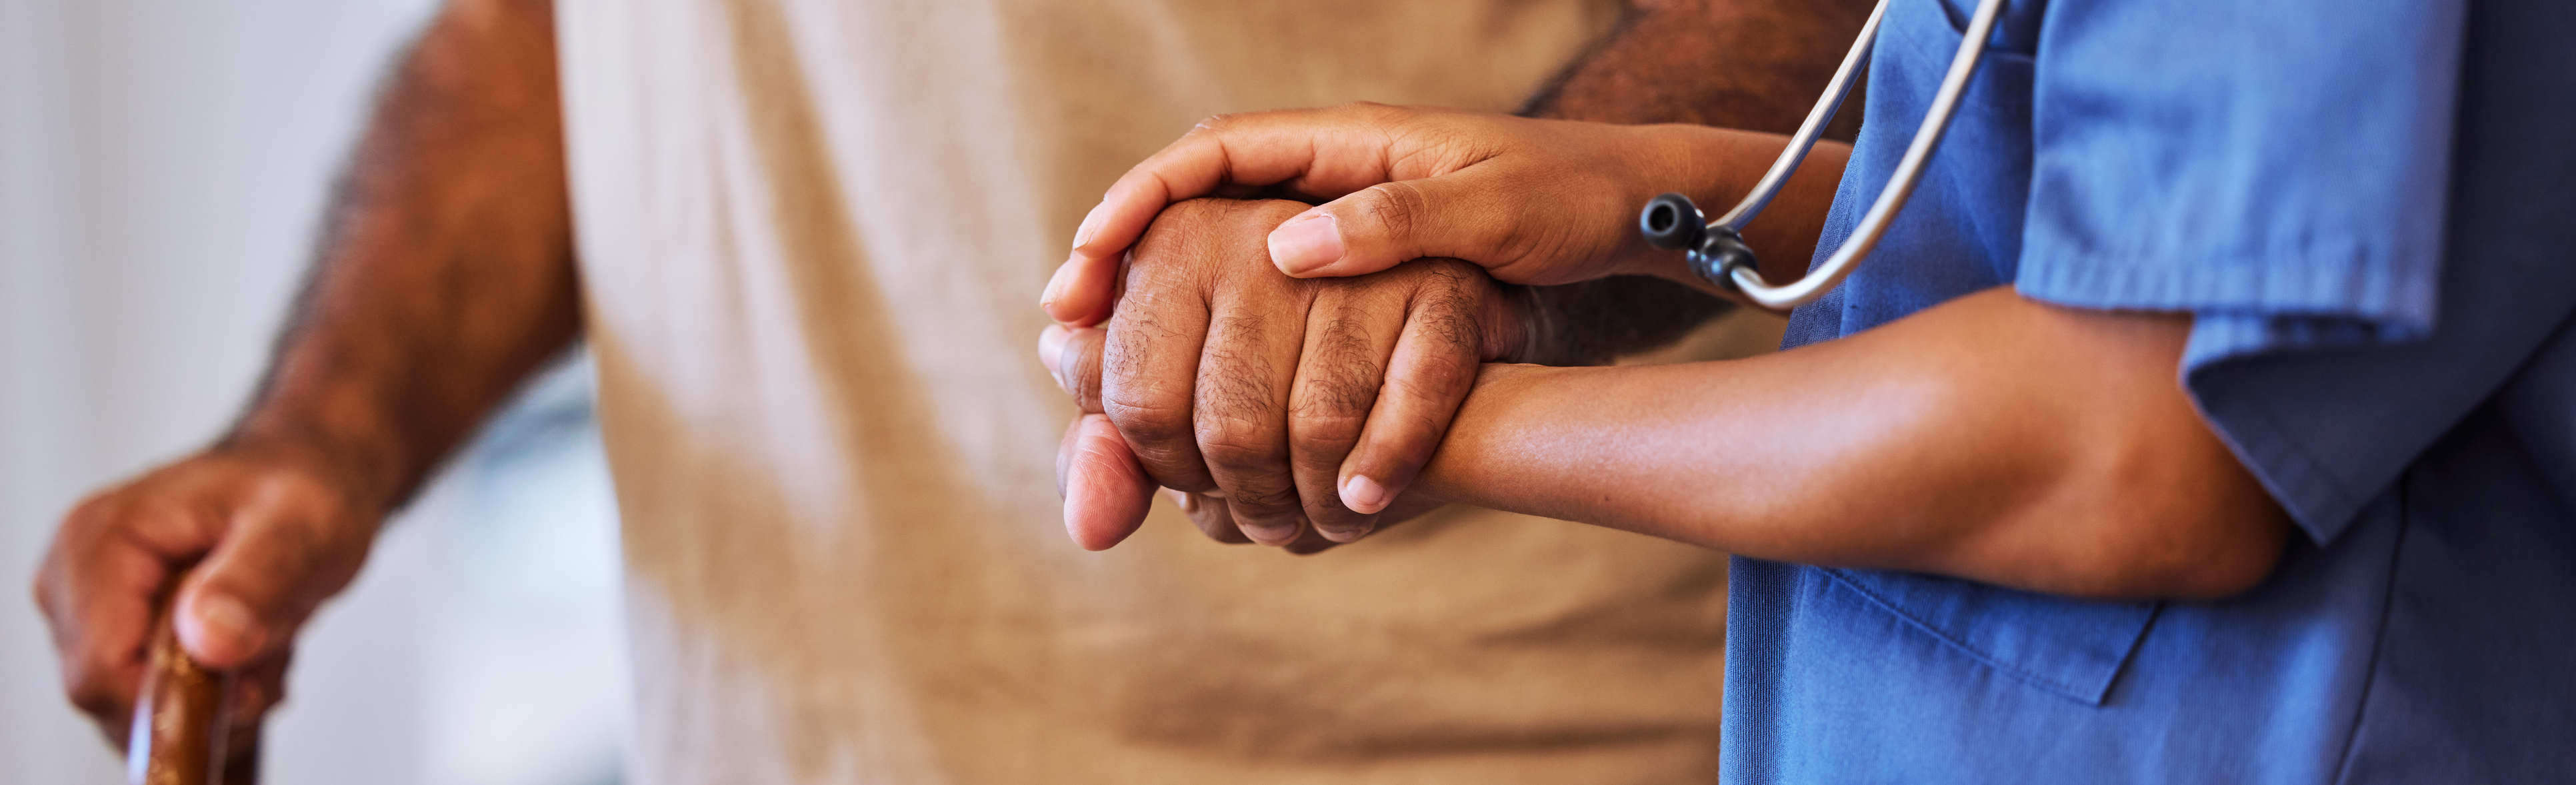 Health care professional holding hands with man